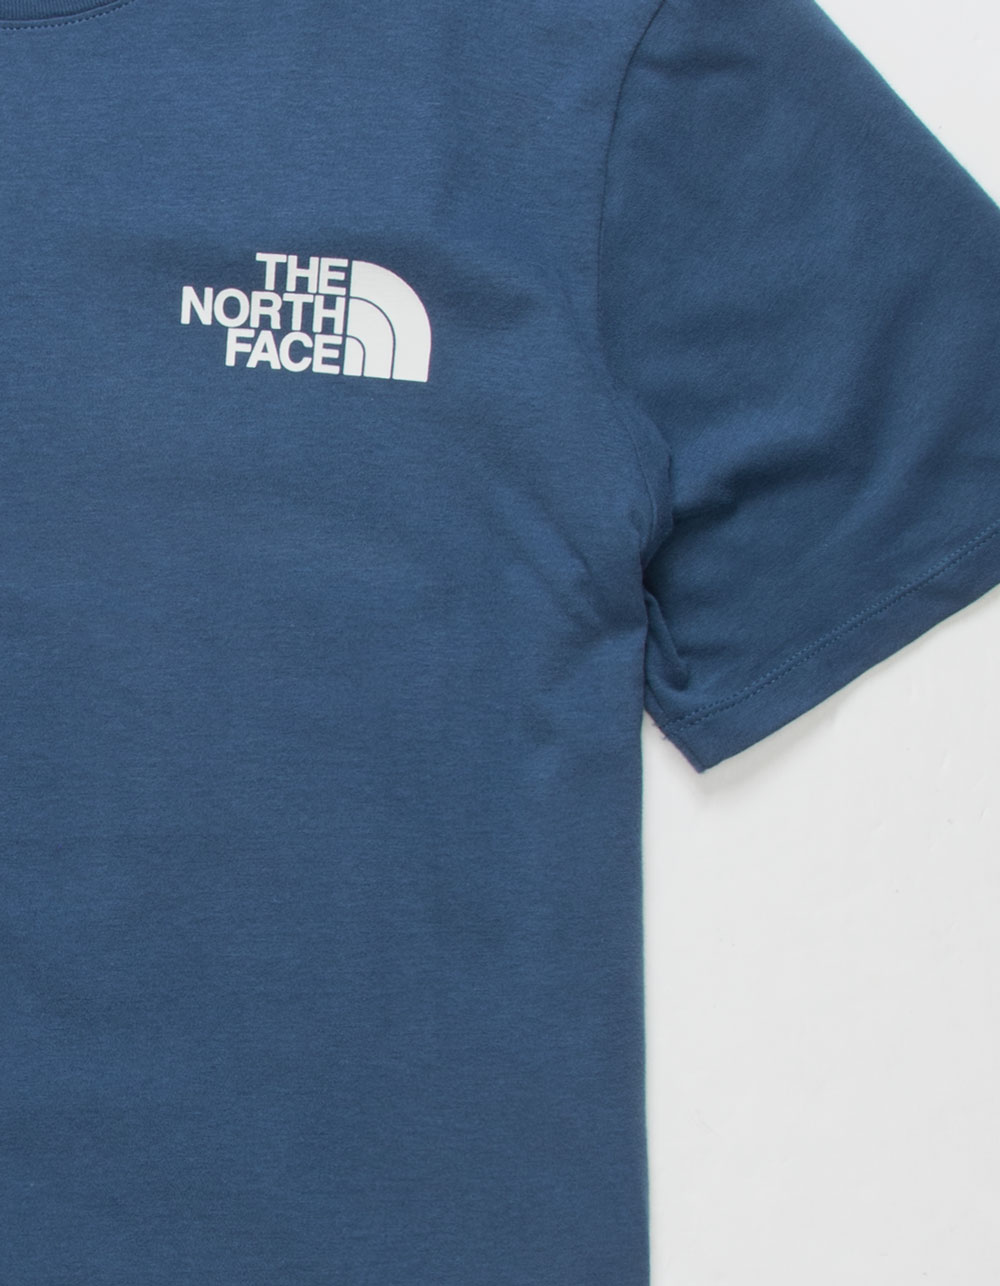 THE NORTH FACE Graphic Injection Mens Tee | Tillys